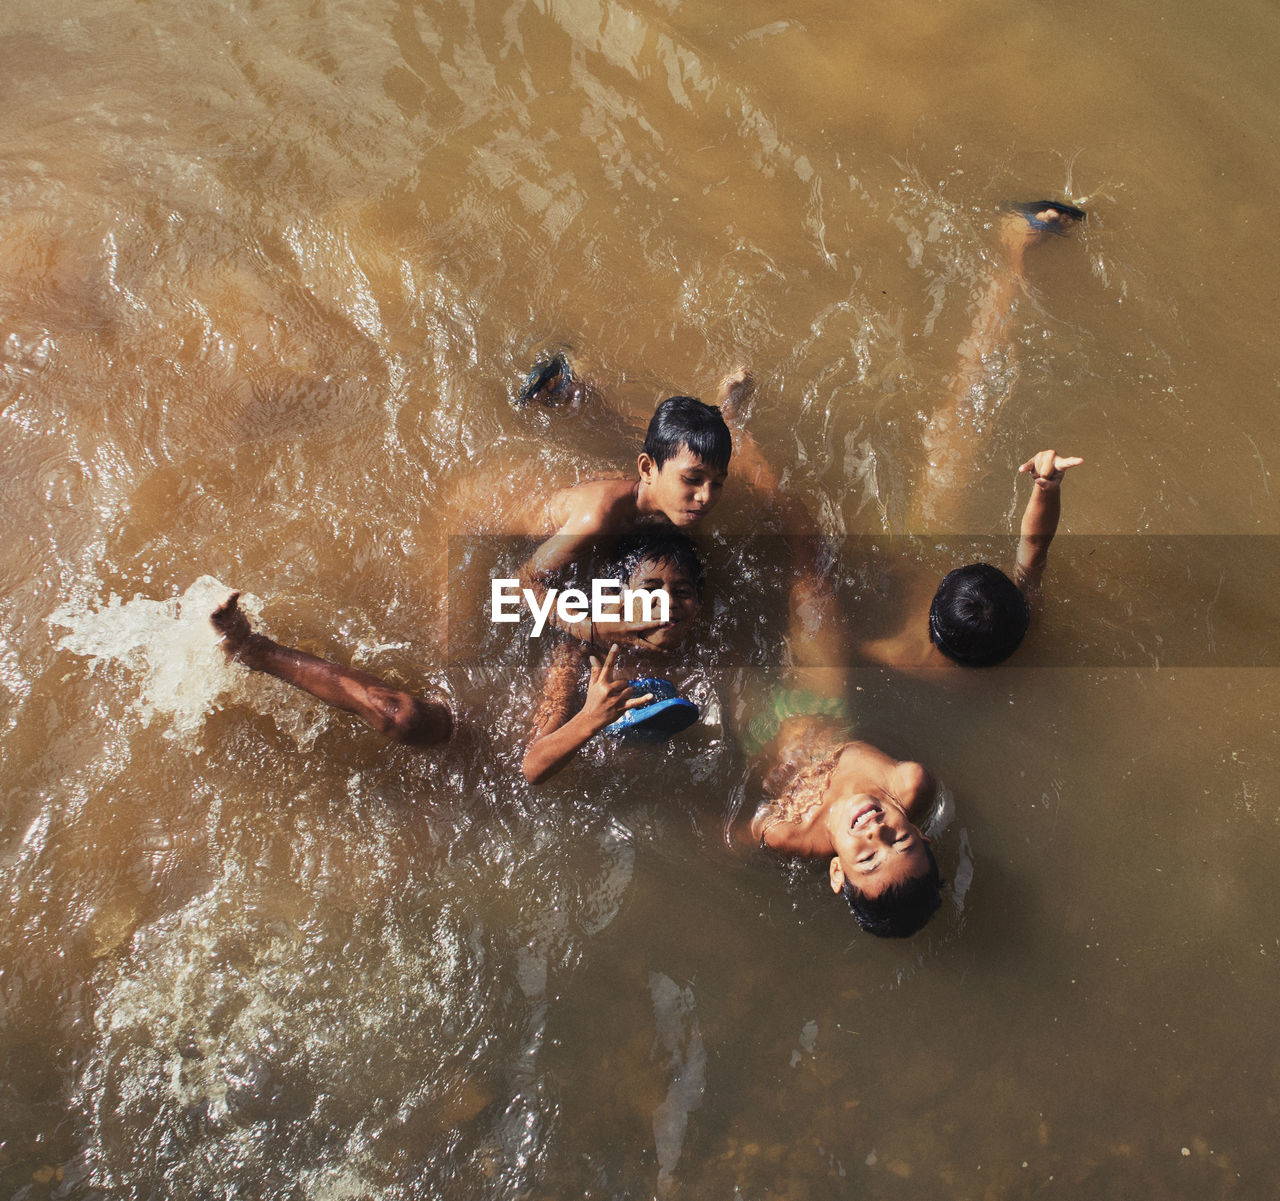 HIGH ANGLE VIEW OF PEOPLE IN SWIMMING POOL